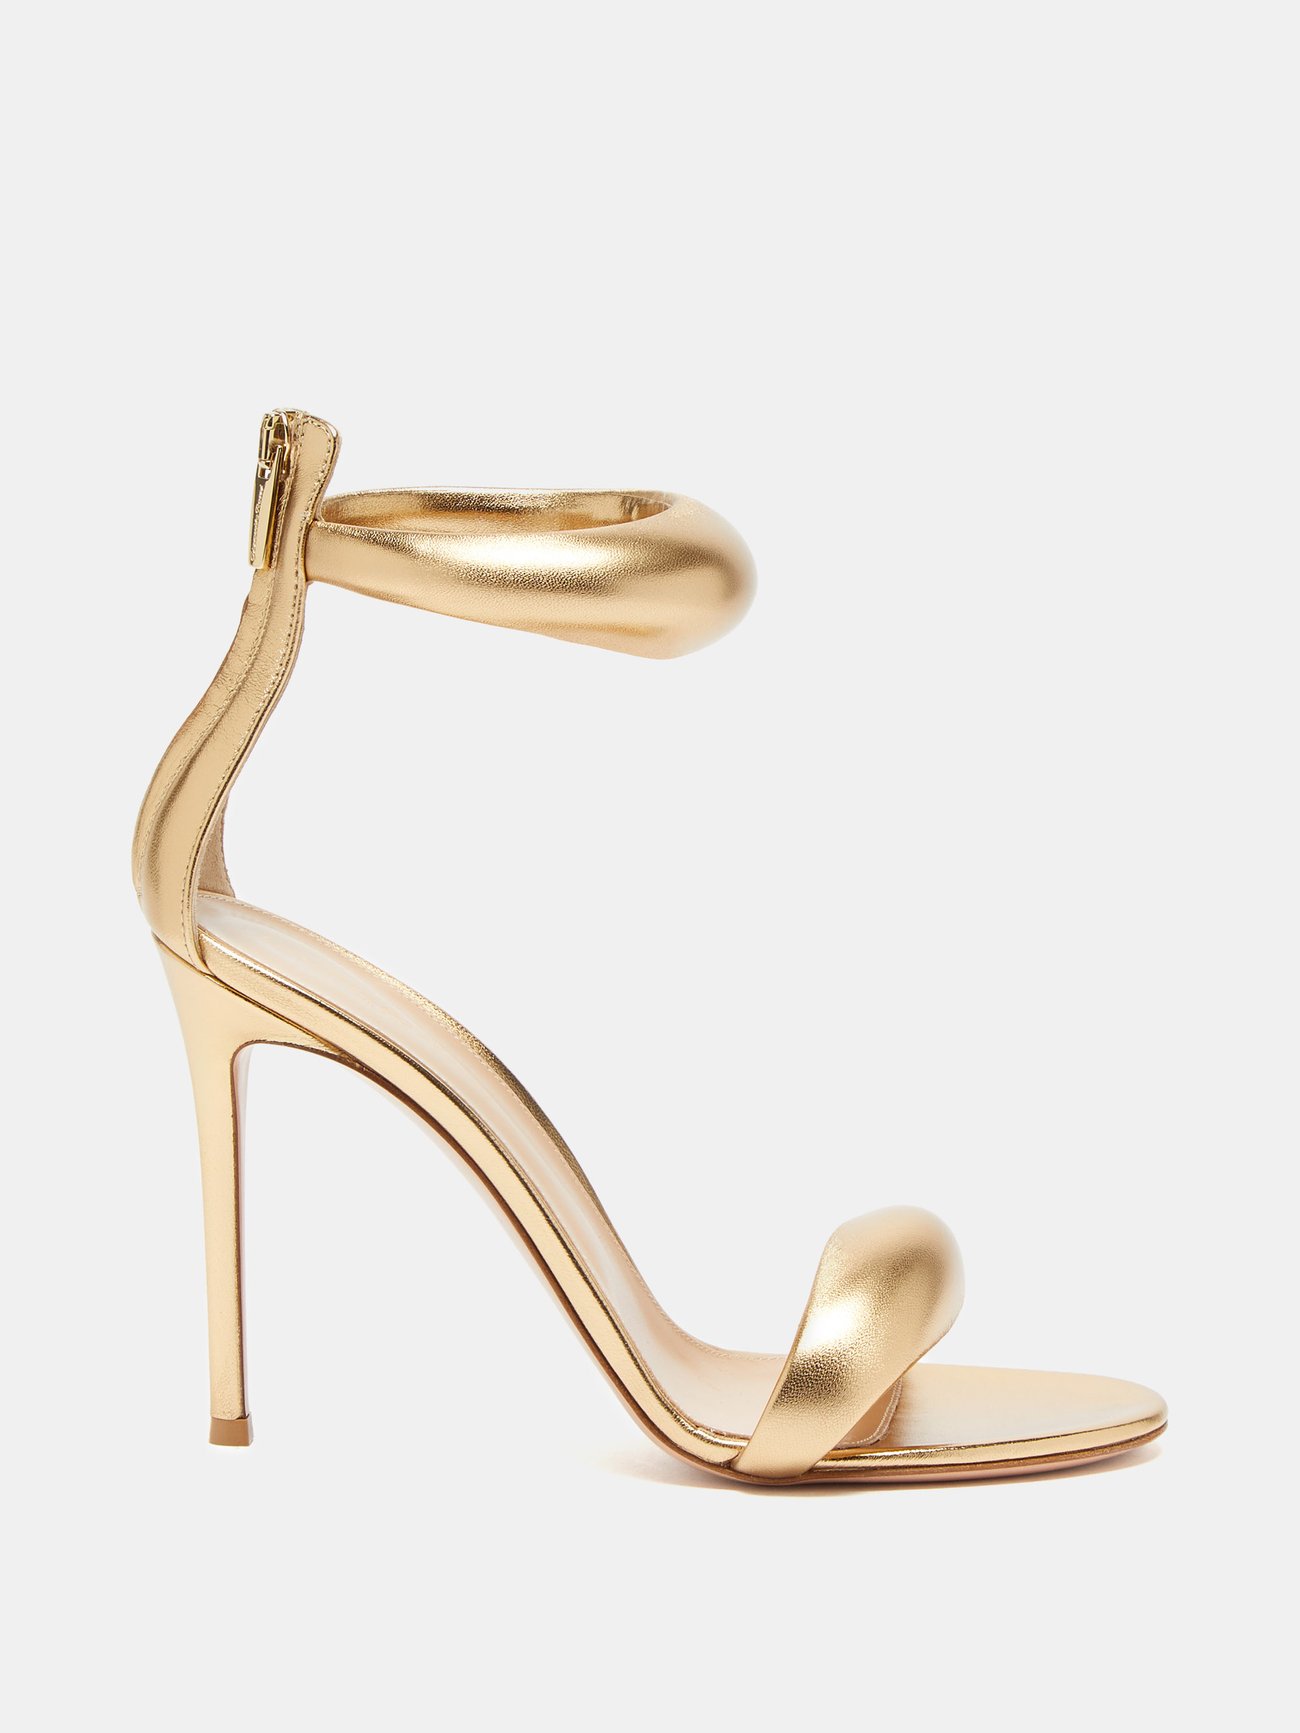 Gold Bijoux 105 leather sandals | Gianvito Rossi | MATCHESFASHION US